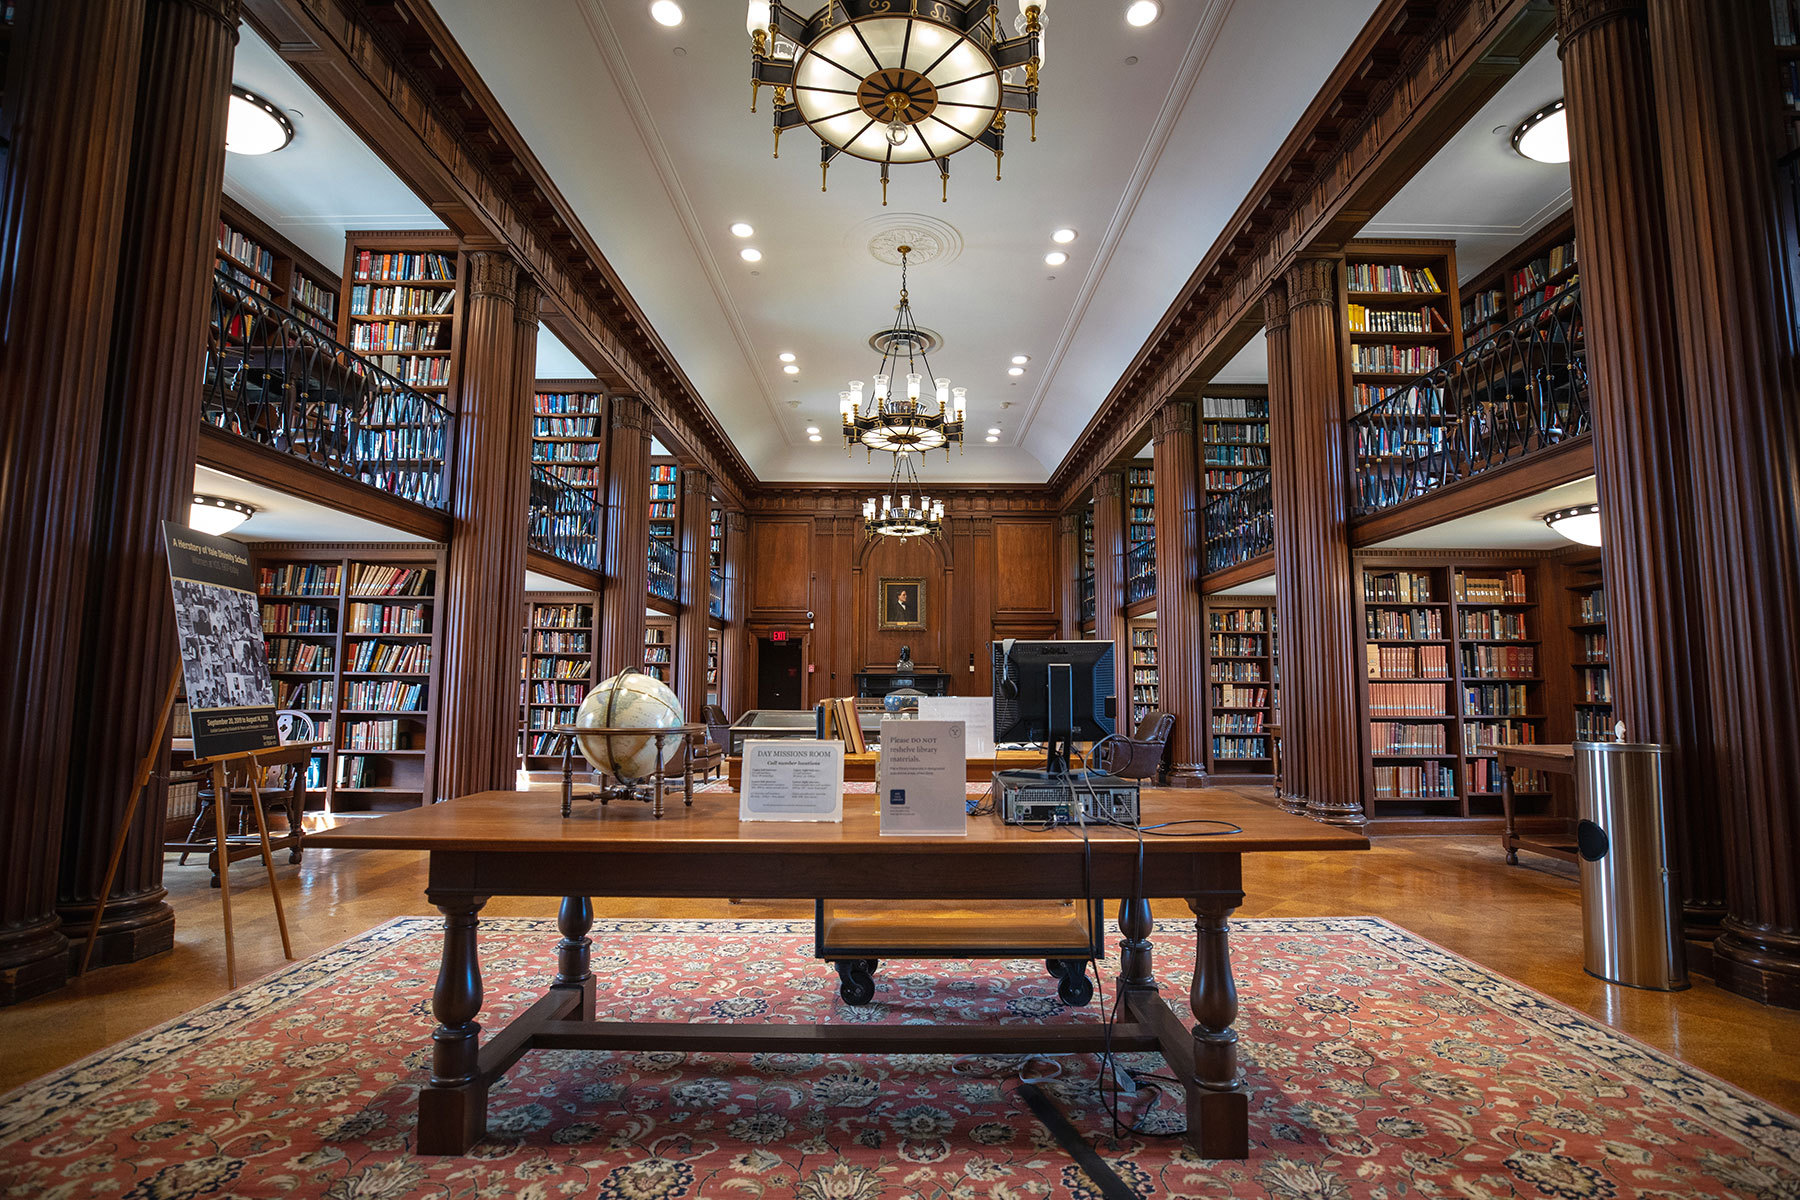 View of the interior of the Divinity School Library